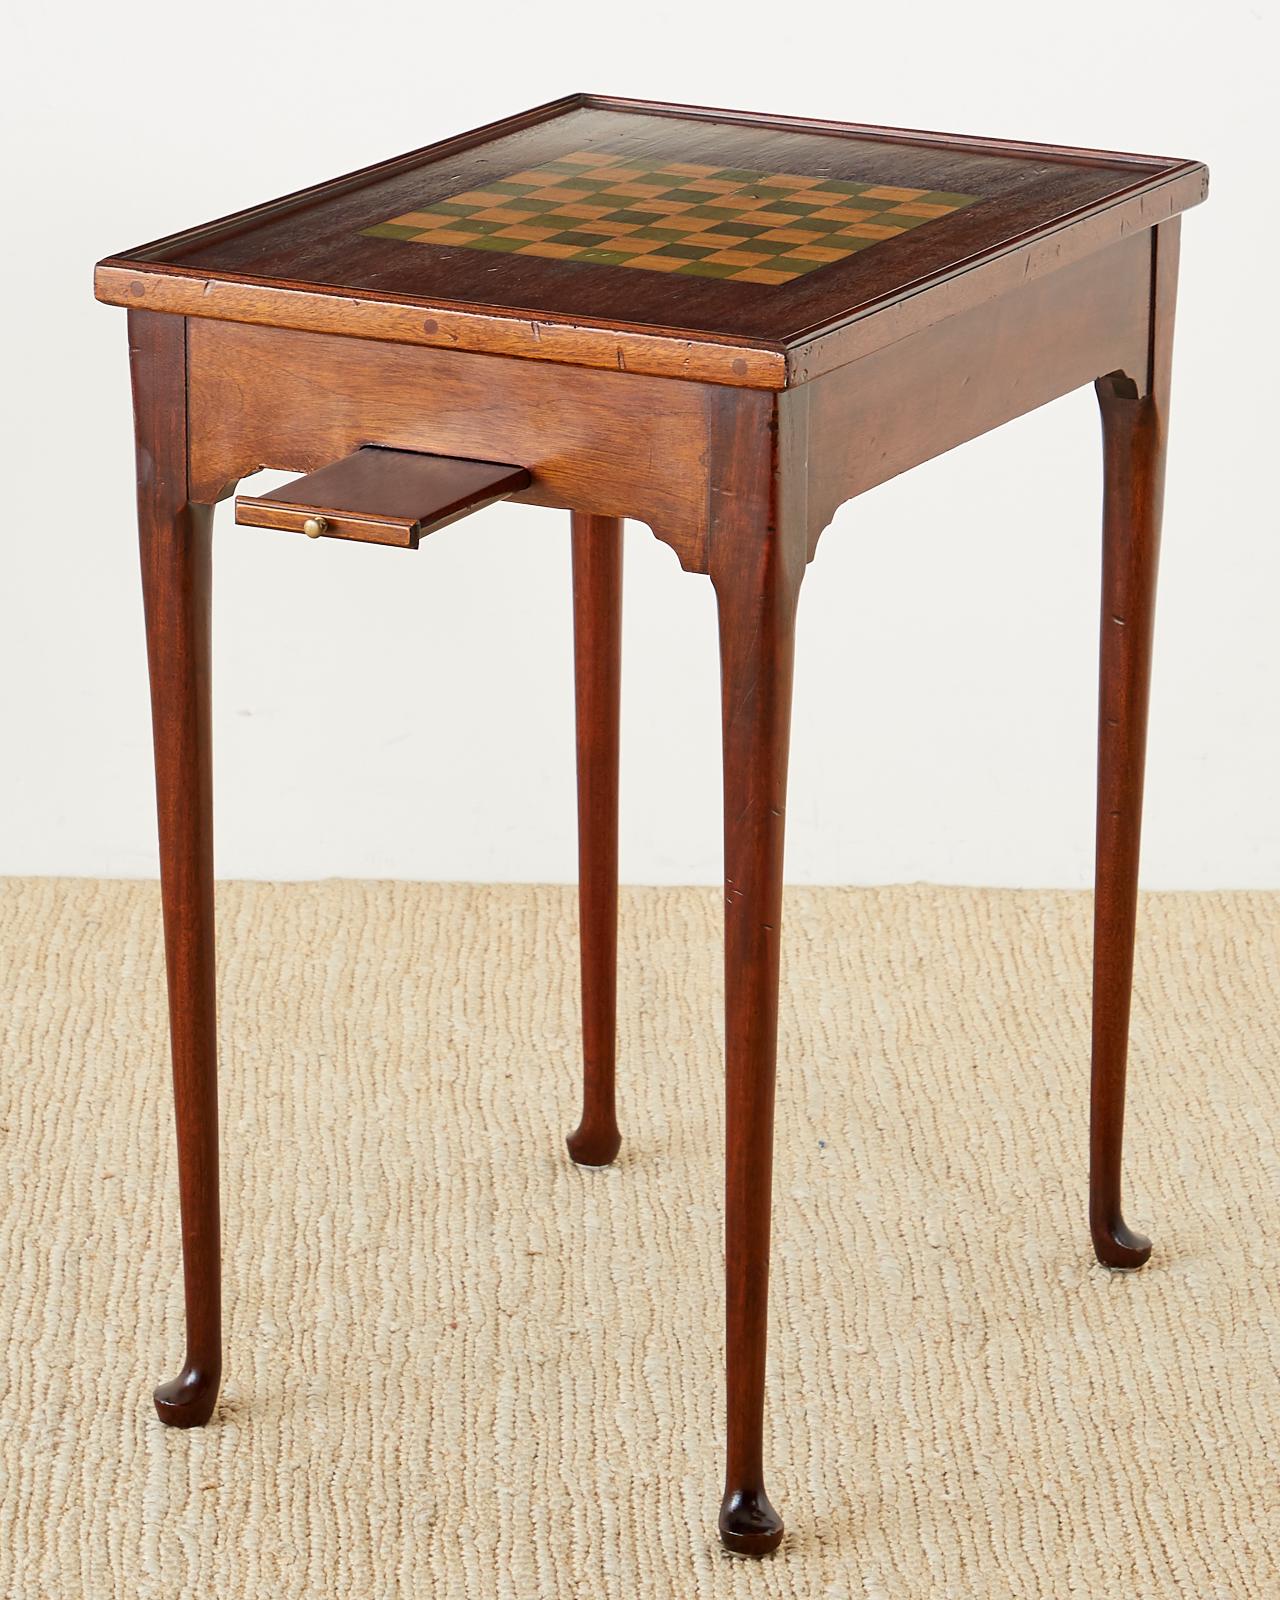 Hand-Crafted Queen Anne Style Mahogany Flip-Top Game Table